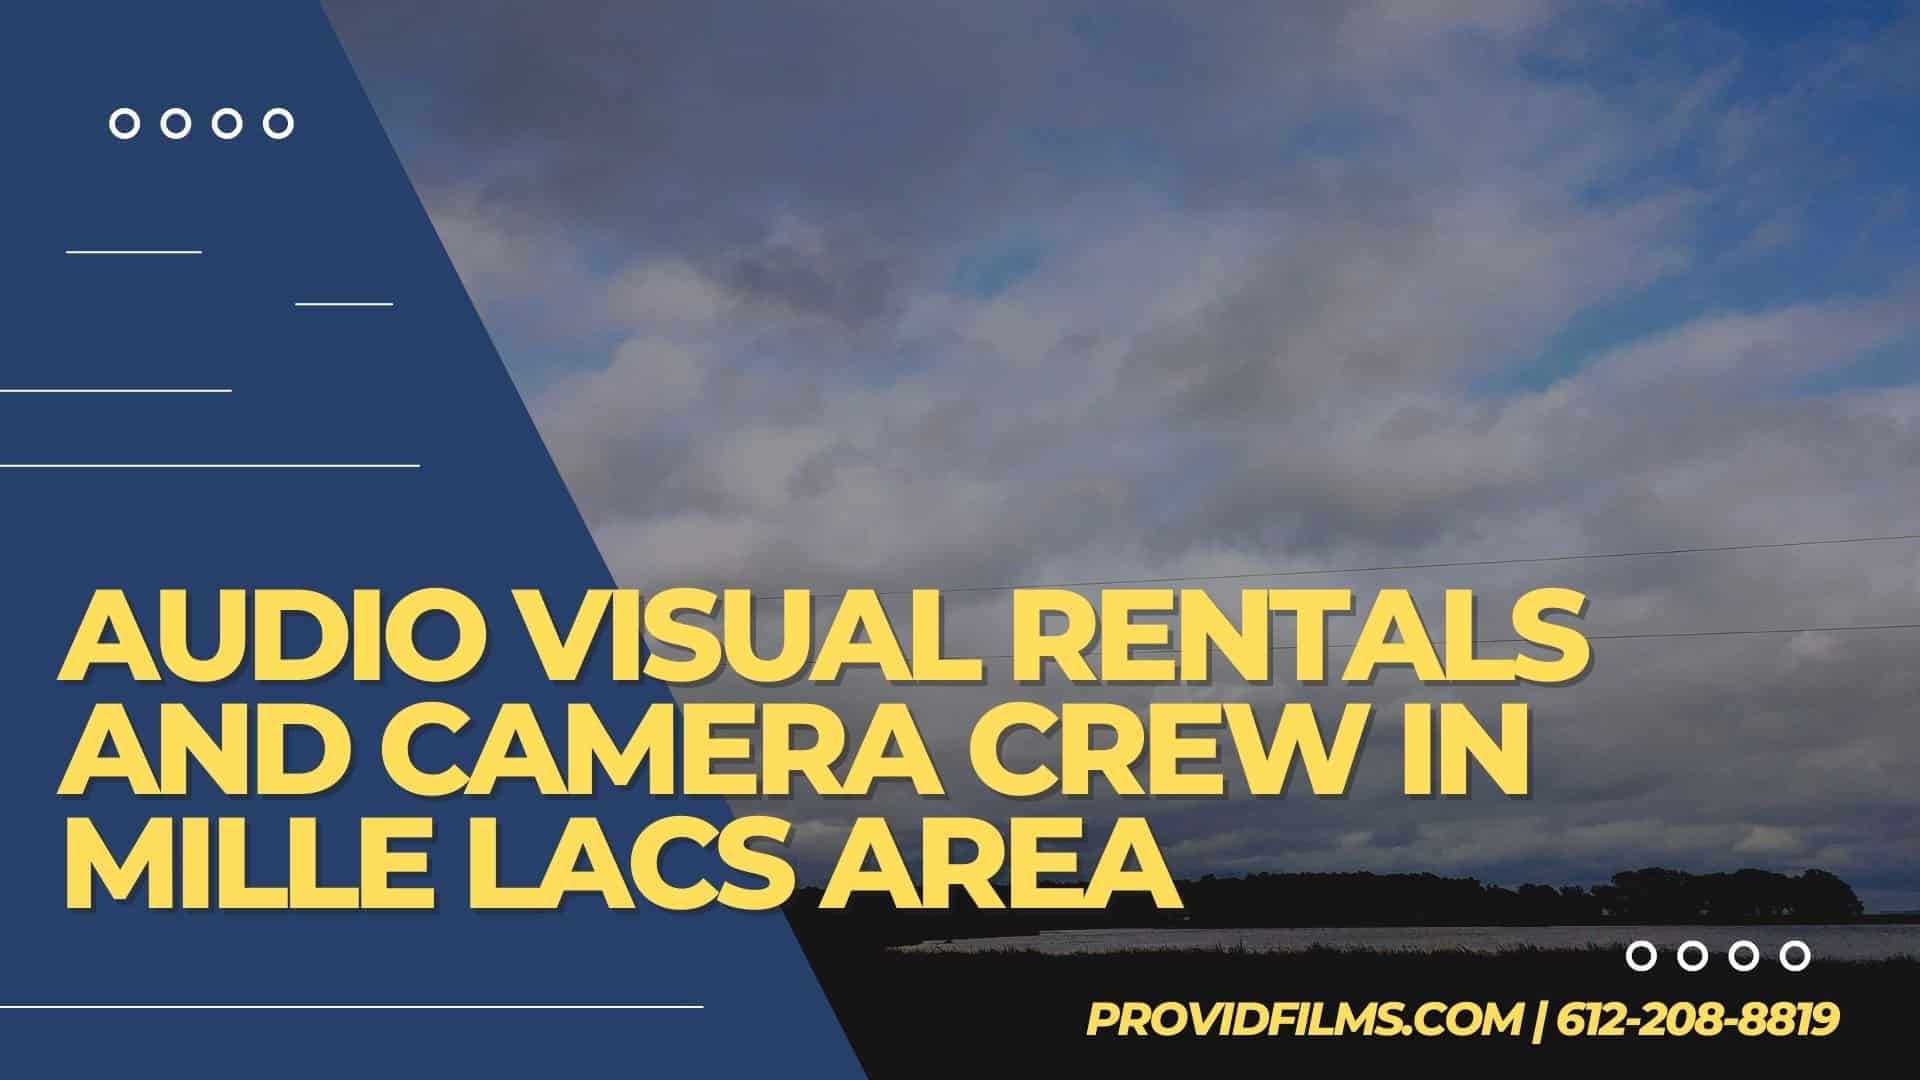 Graphic with a video camera crew with the text saying "AV Rental and Camera Crew in Mille Lacs County"